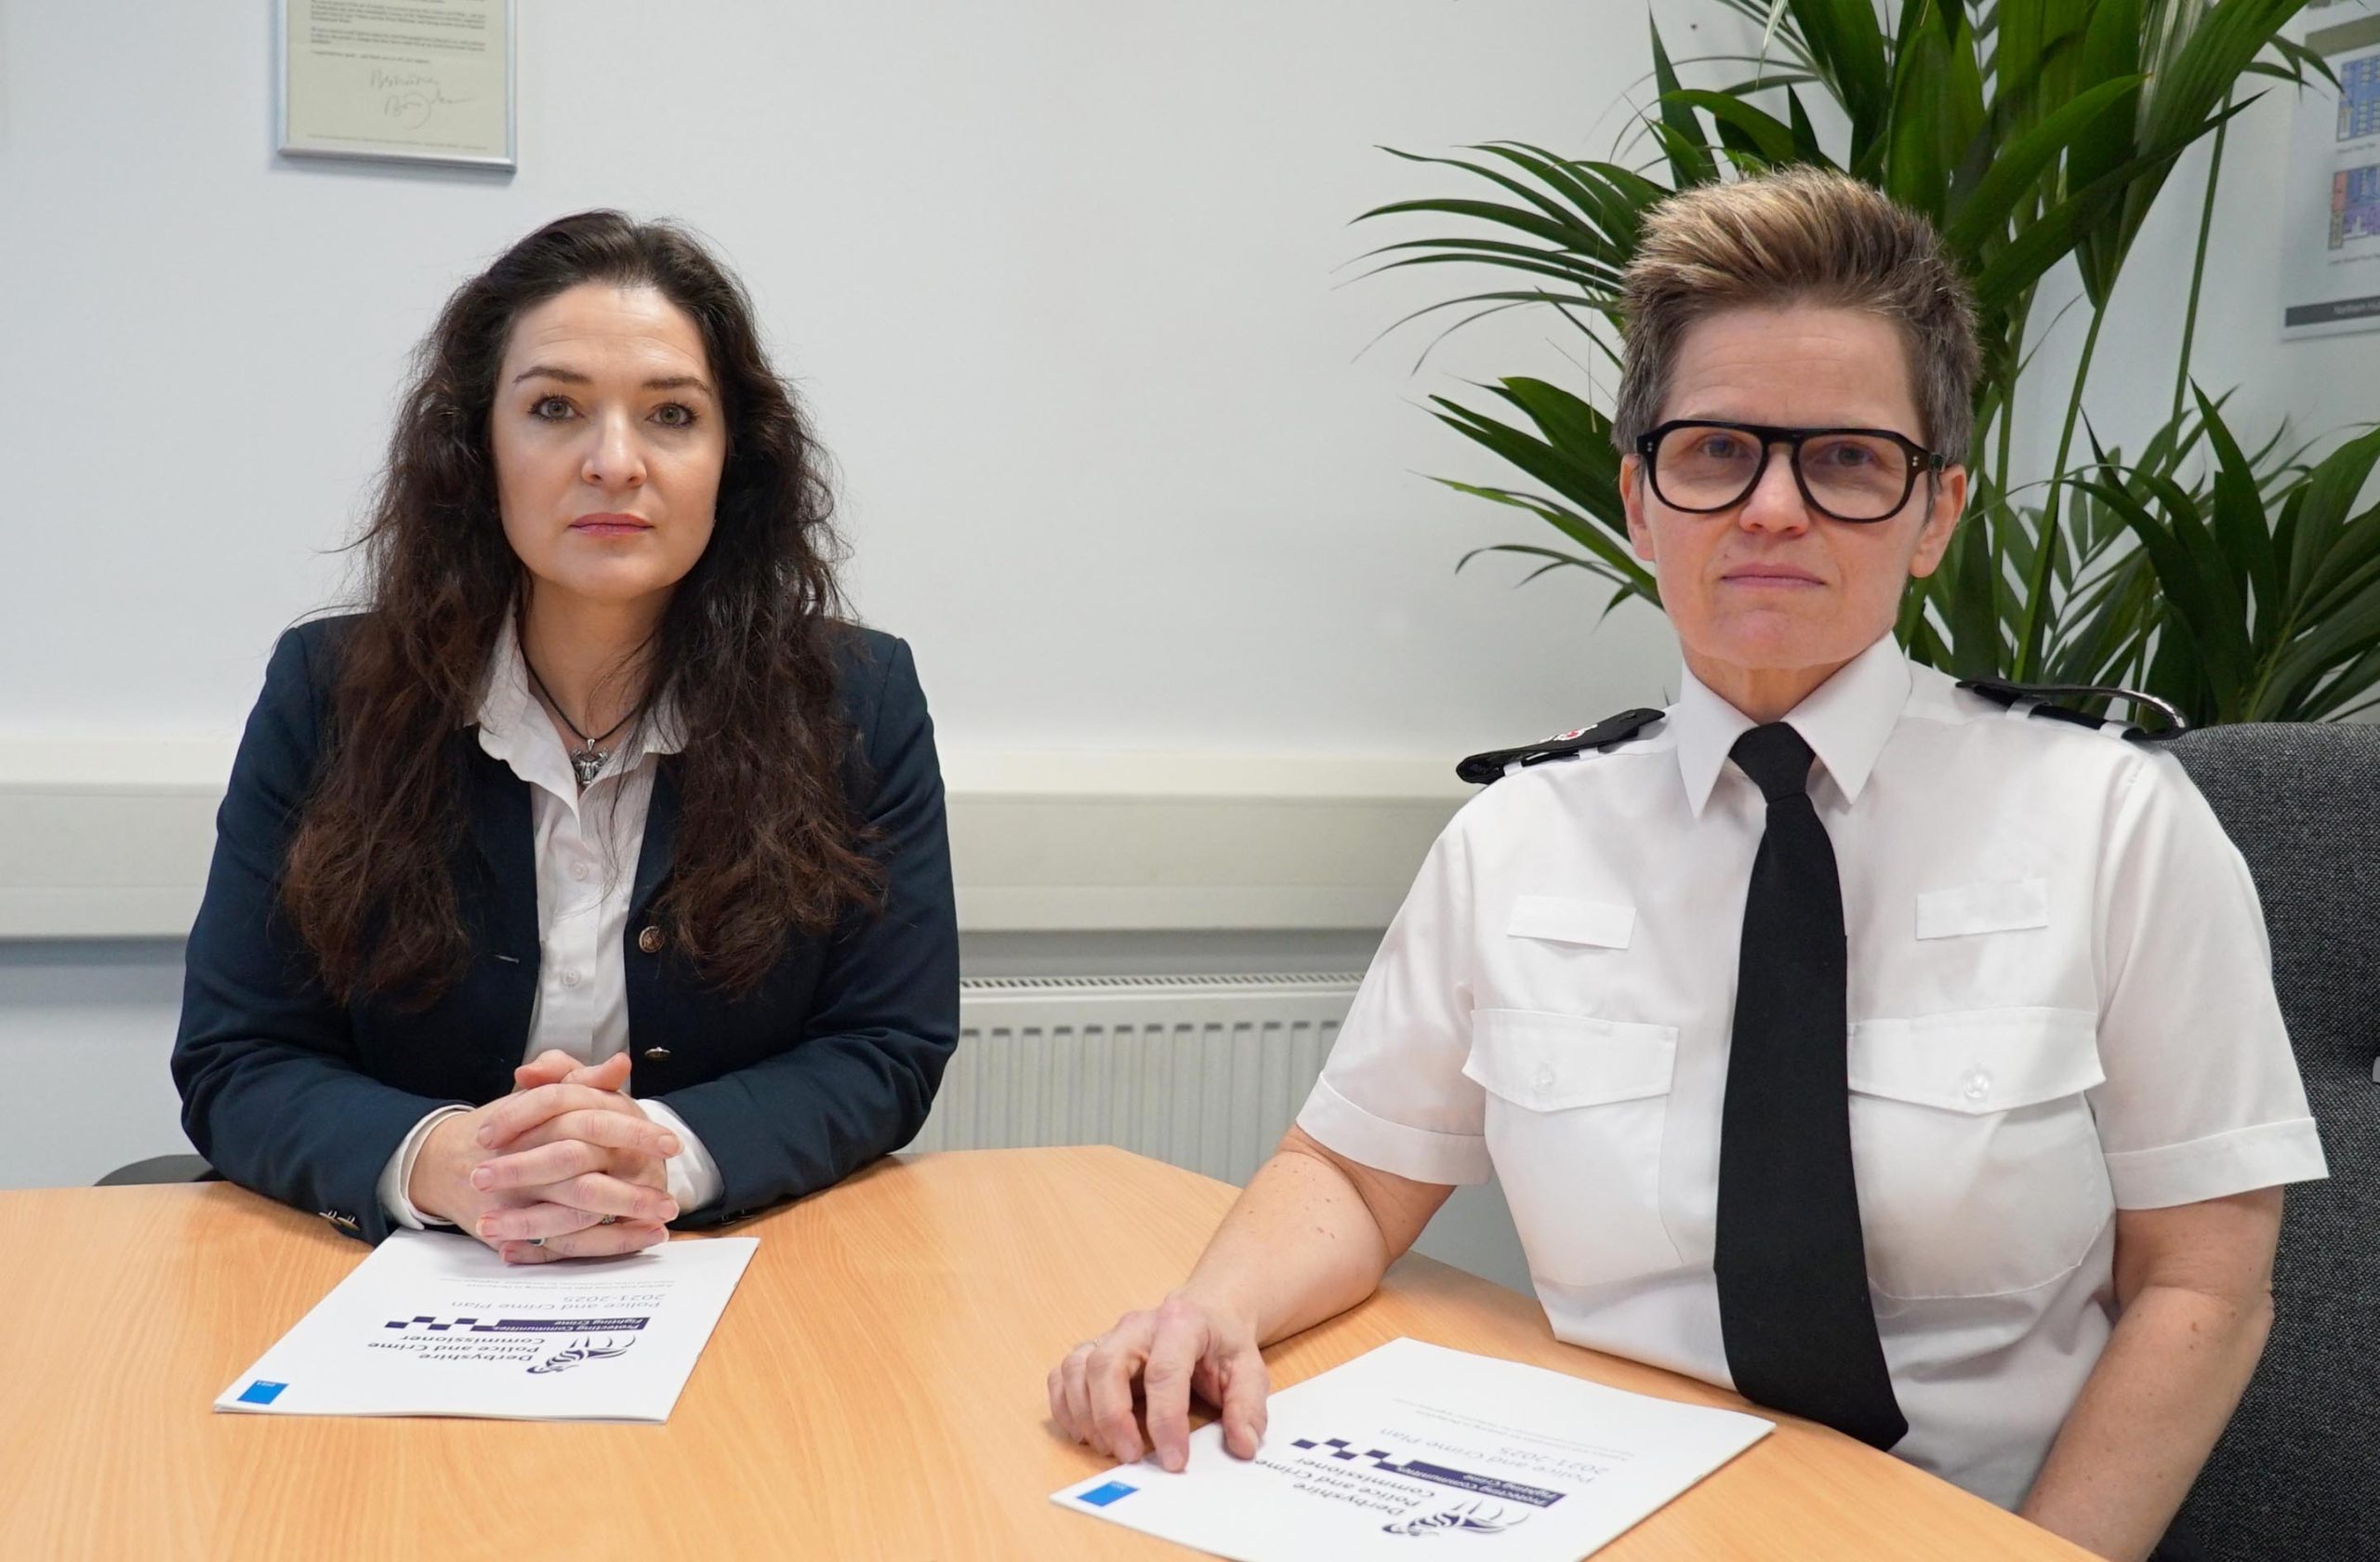 Police and Crime Commissioner Angelique Foster with Chief Constable Rachel Swann